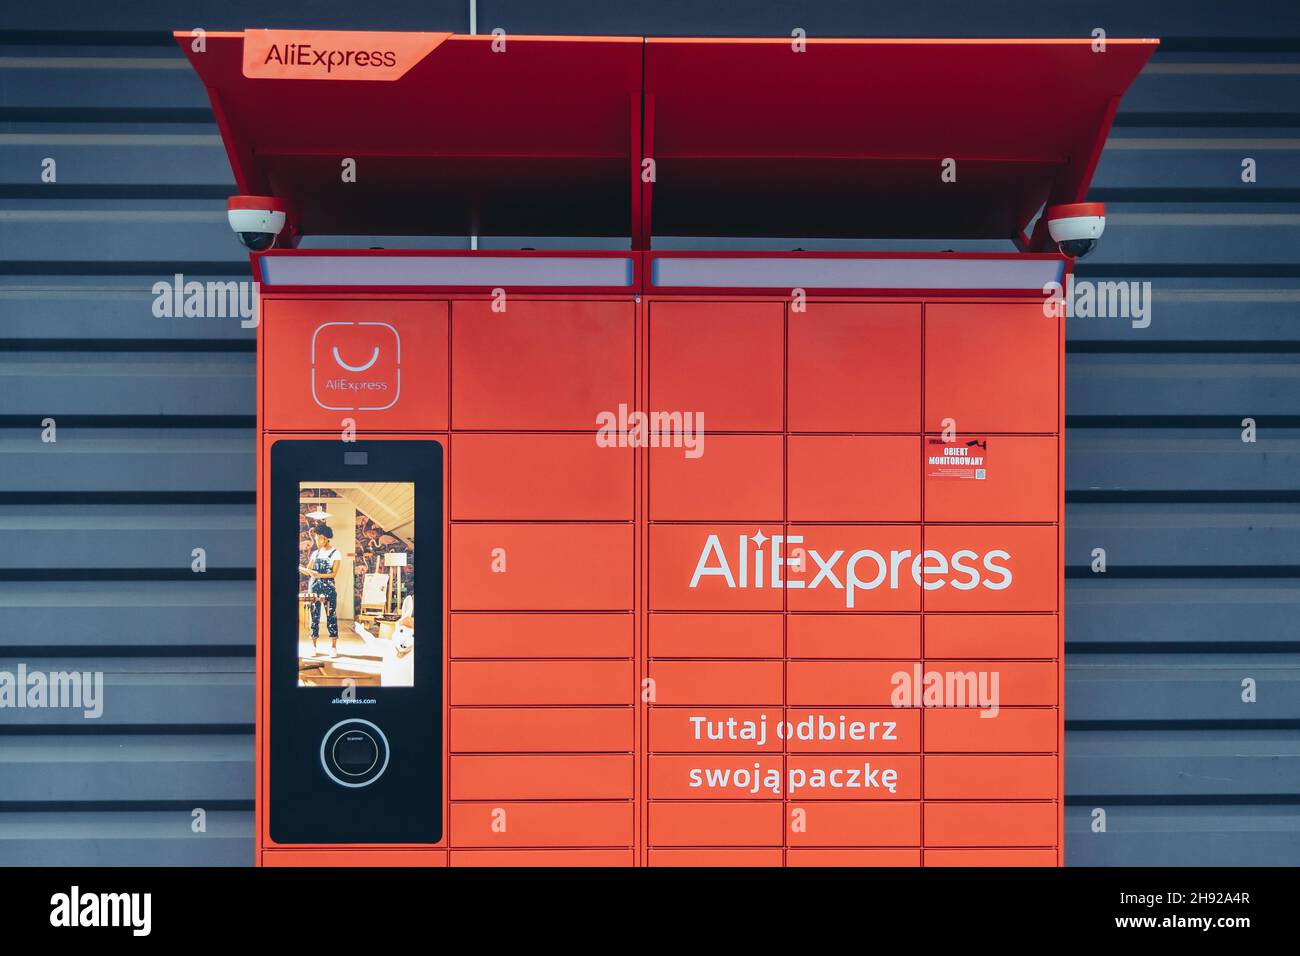 Parcel lockers of AliExpress online retail service based in China owned by  the Alibaba Group in Warsaw, capital of Poland Stock Photo - Alamy